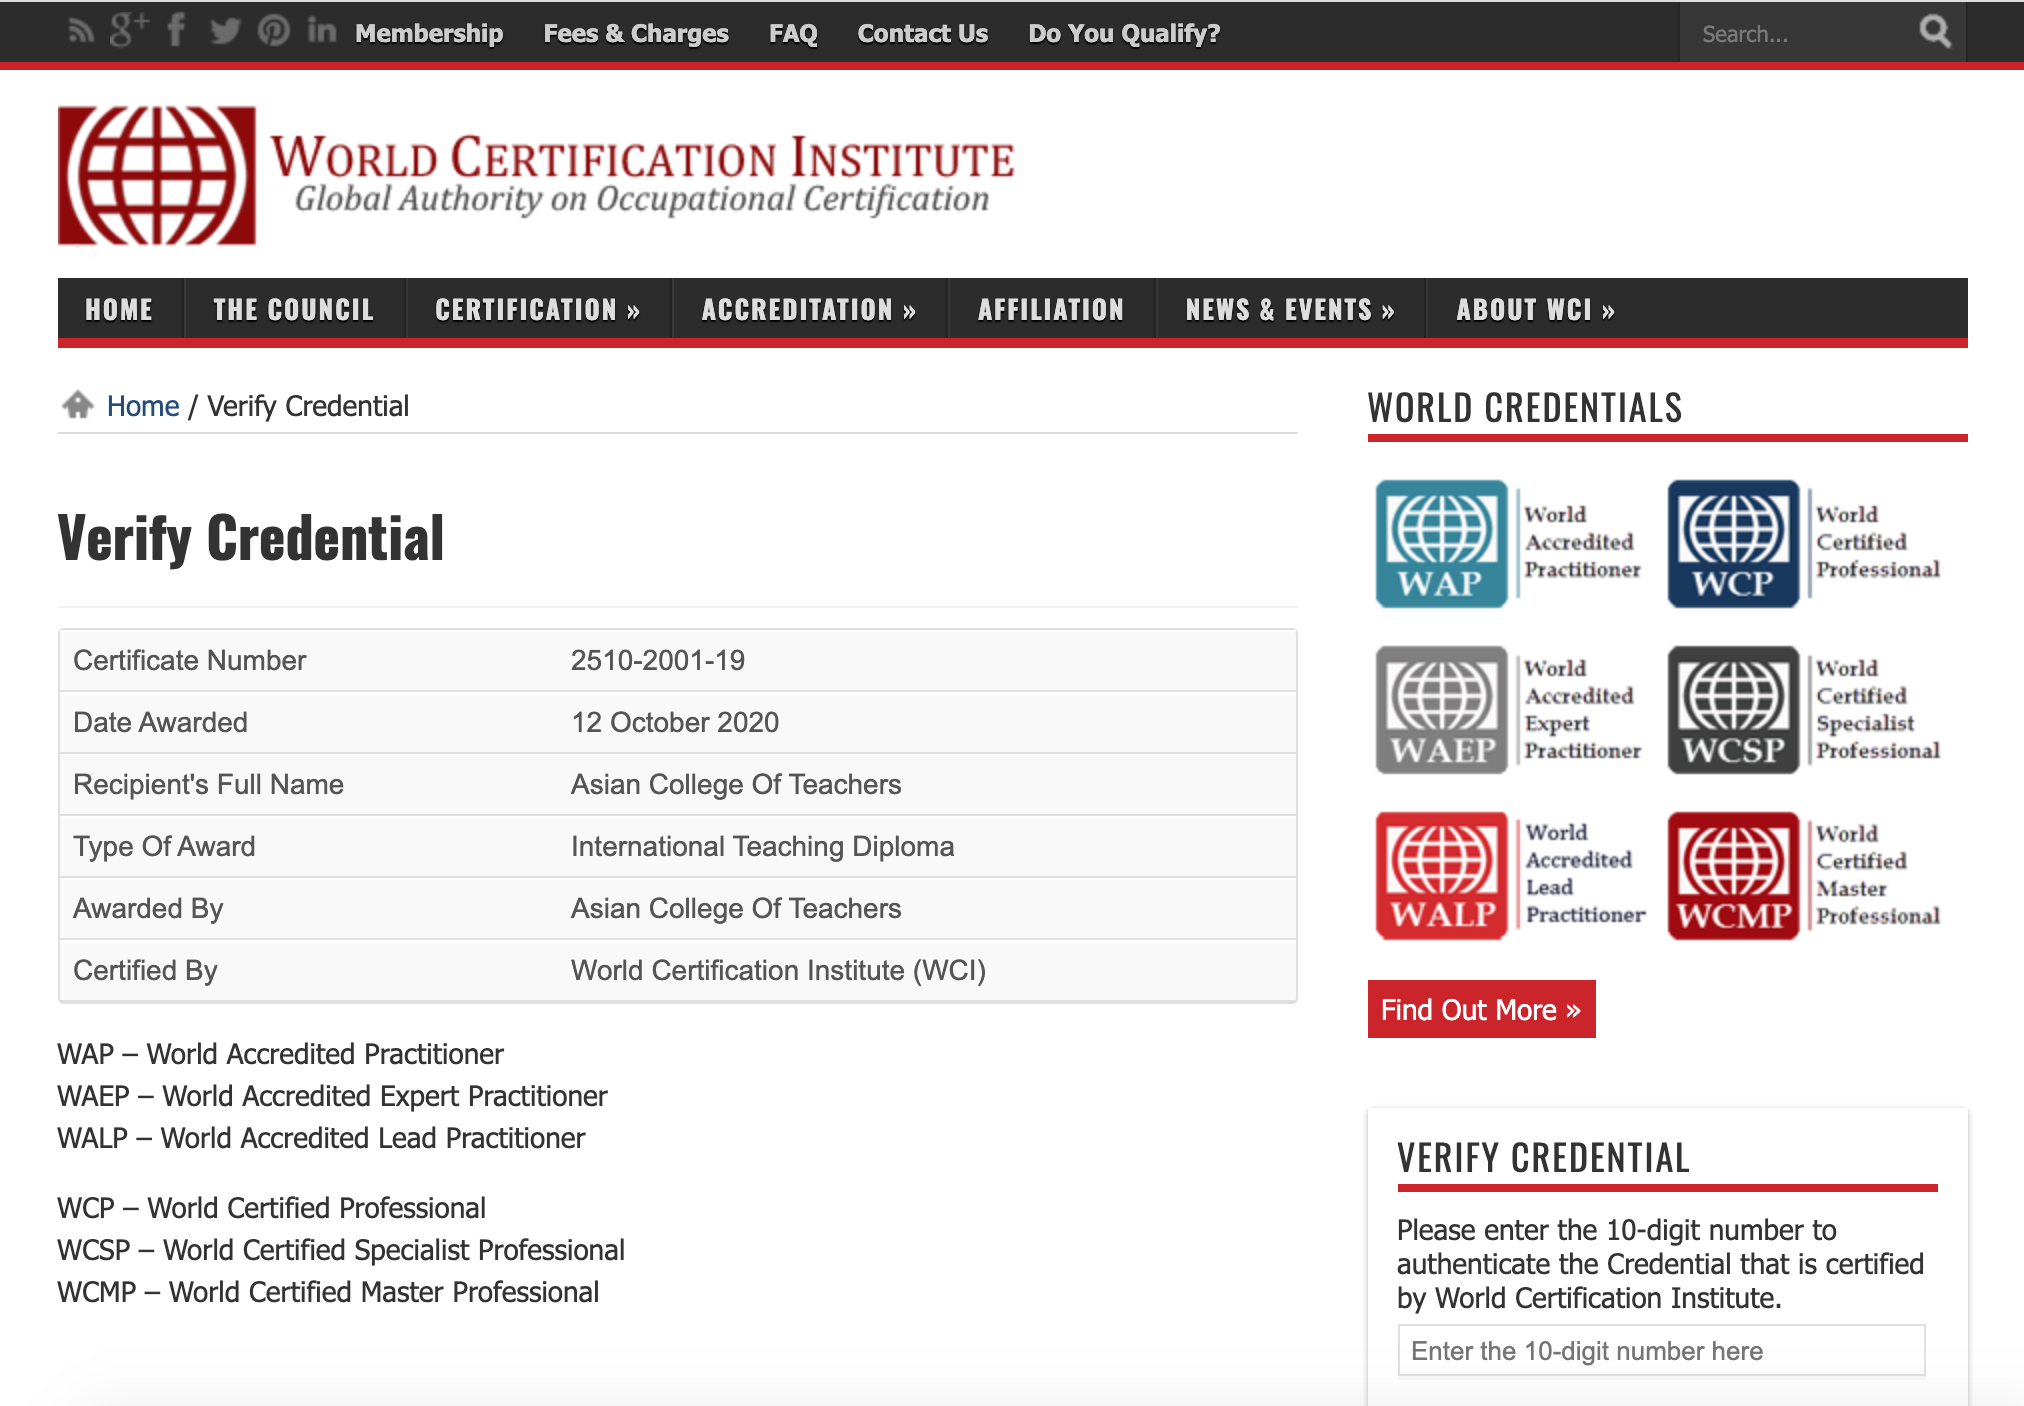 ACT’s Credential Verification by WCI